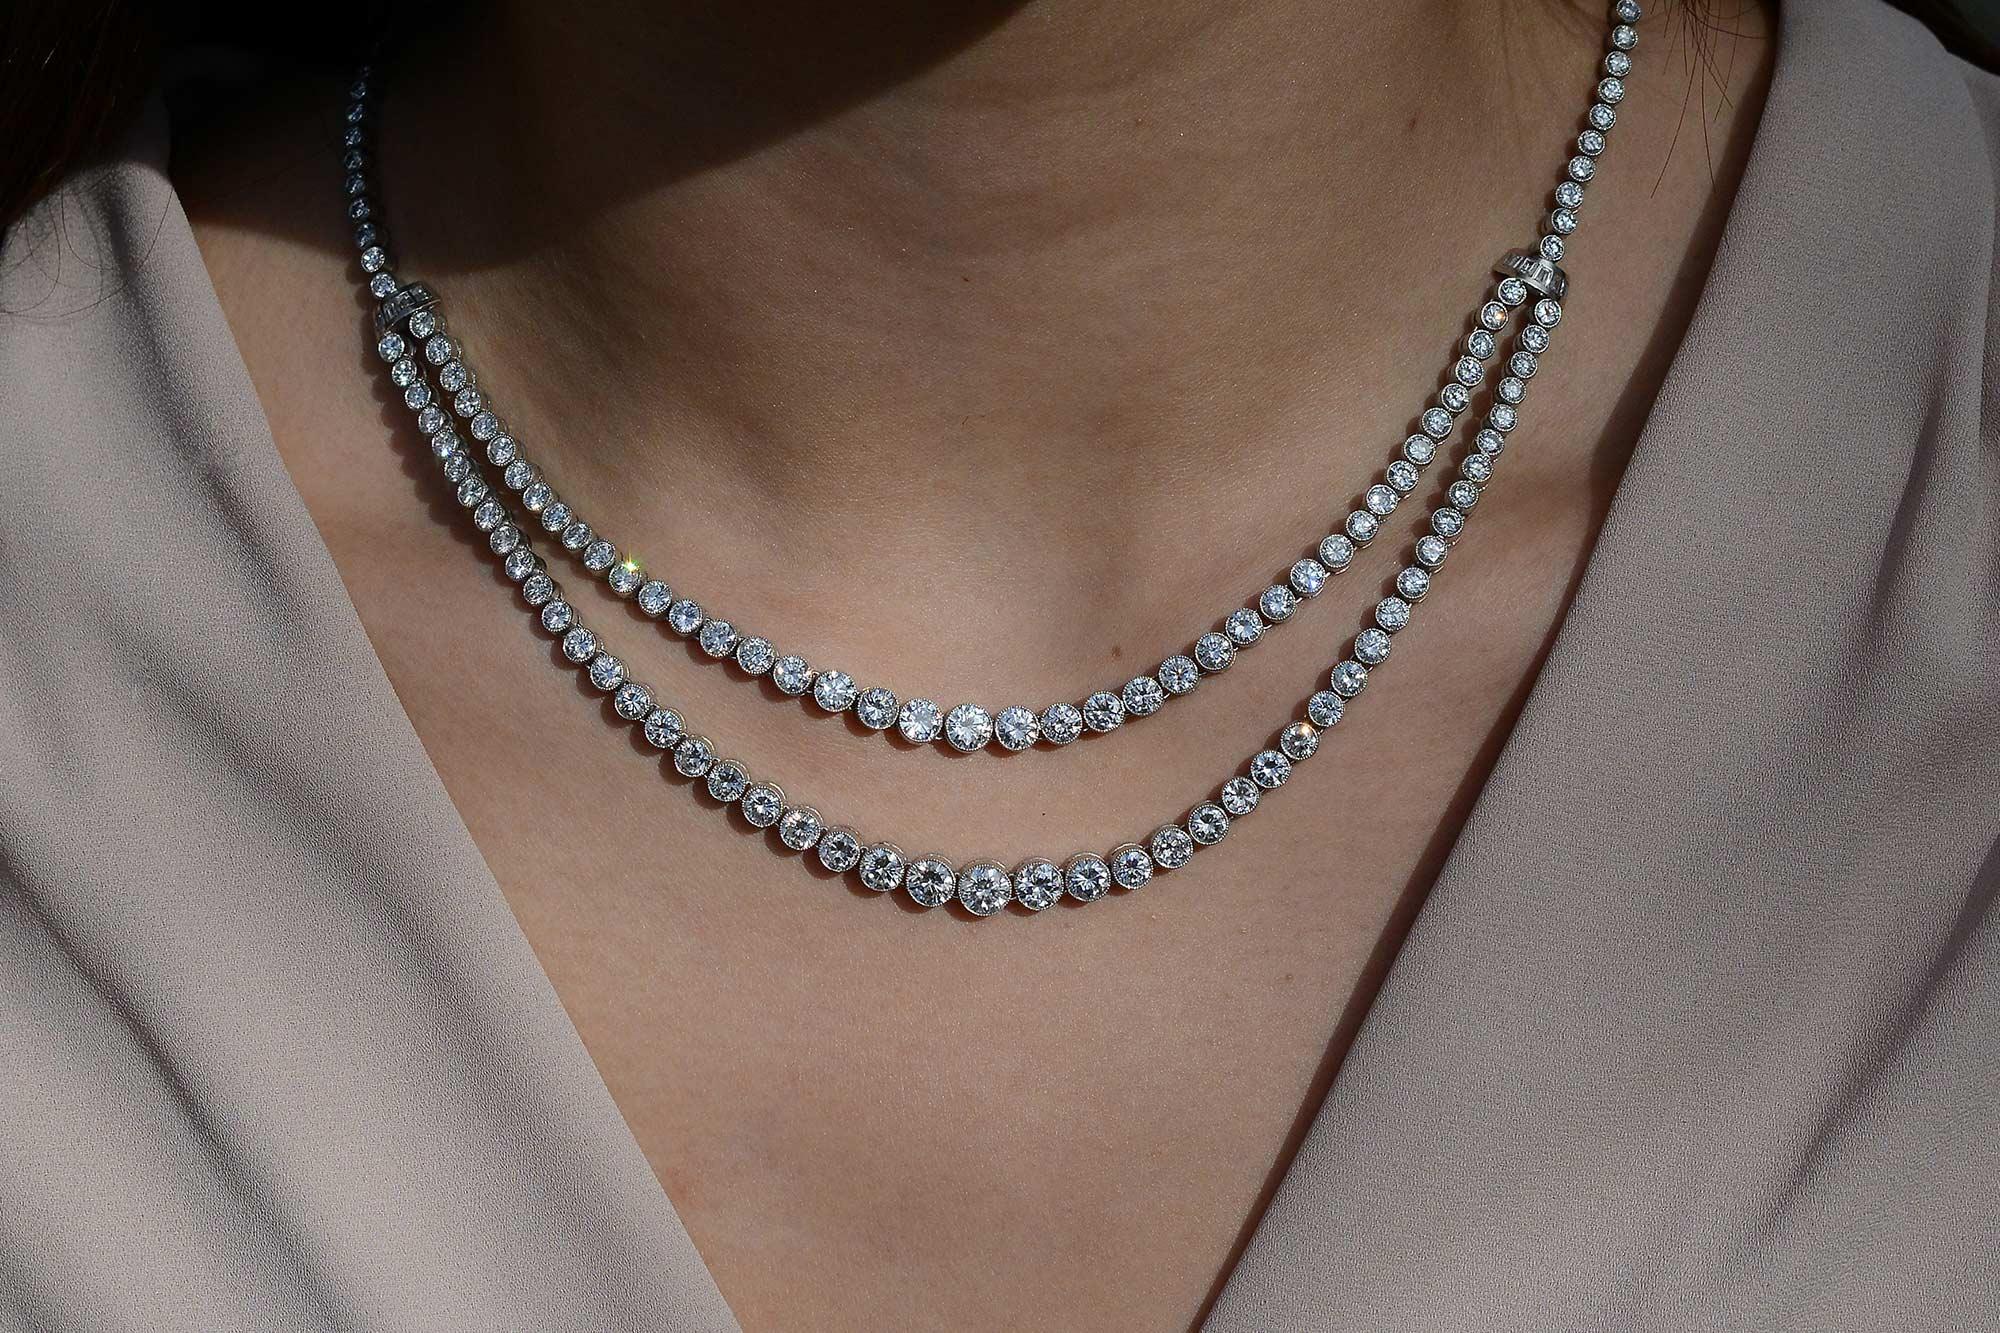 This astonishing double-strand diamond Rivière necklace certainly delivers the wow factor. Carrying a monumental 22.94 carats of diamonds individually stationed in a bezel setting extensively detailed with a delicately milgrained rim. Every diamond